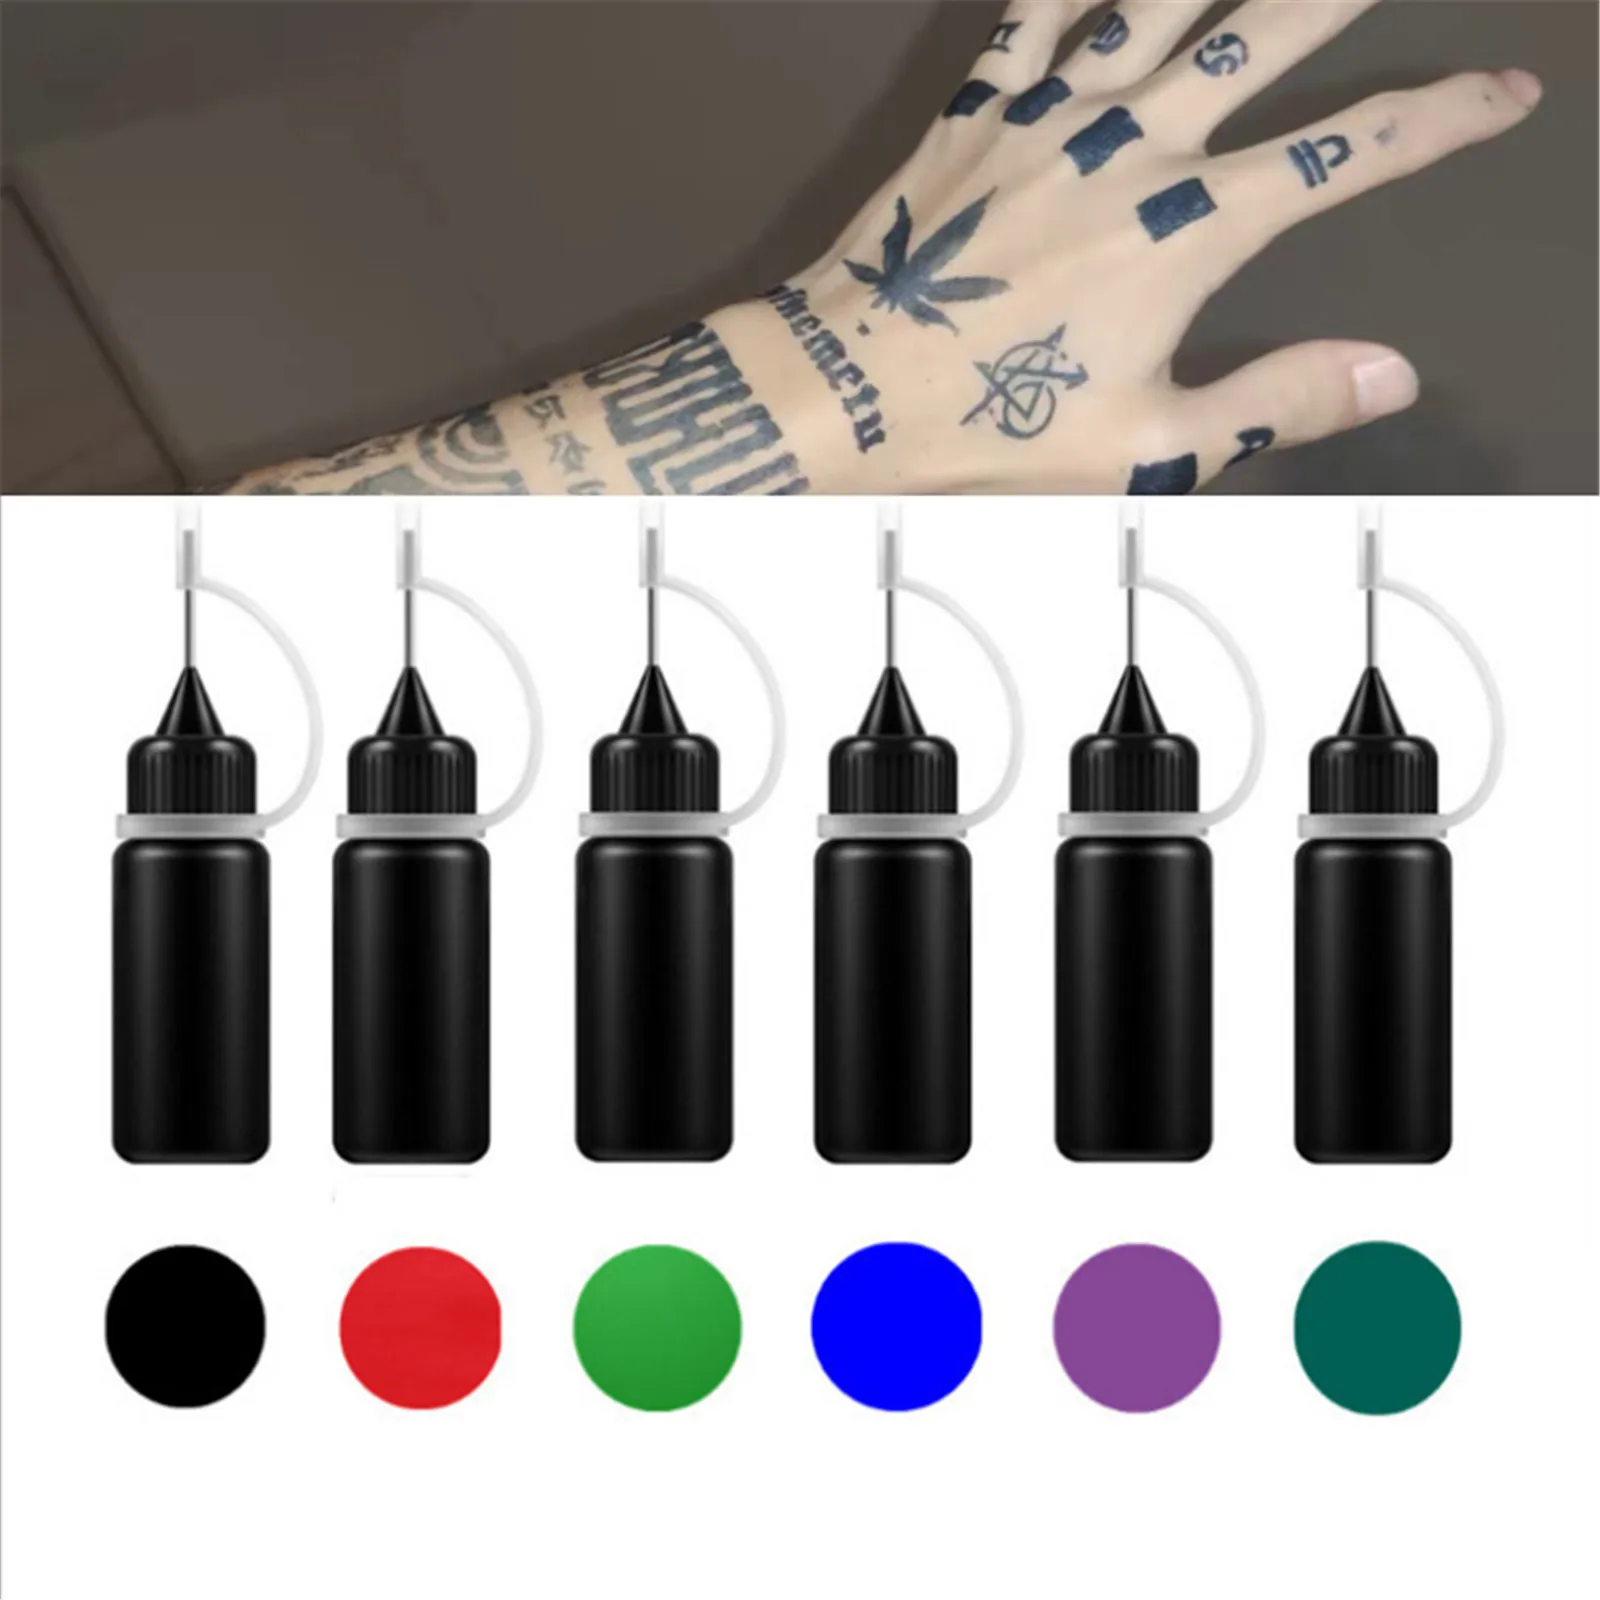 Henna Tattoo Juice Ink Temporary Natural Organic Fruit Gel For Body Paint Long-Lasting Safe Waterproof Diy Tattoo Paste 7 Colors